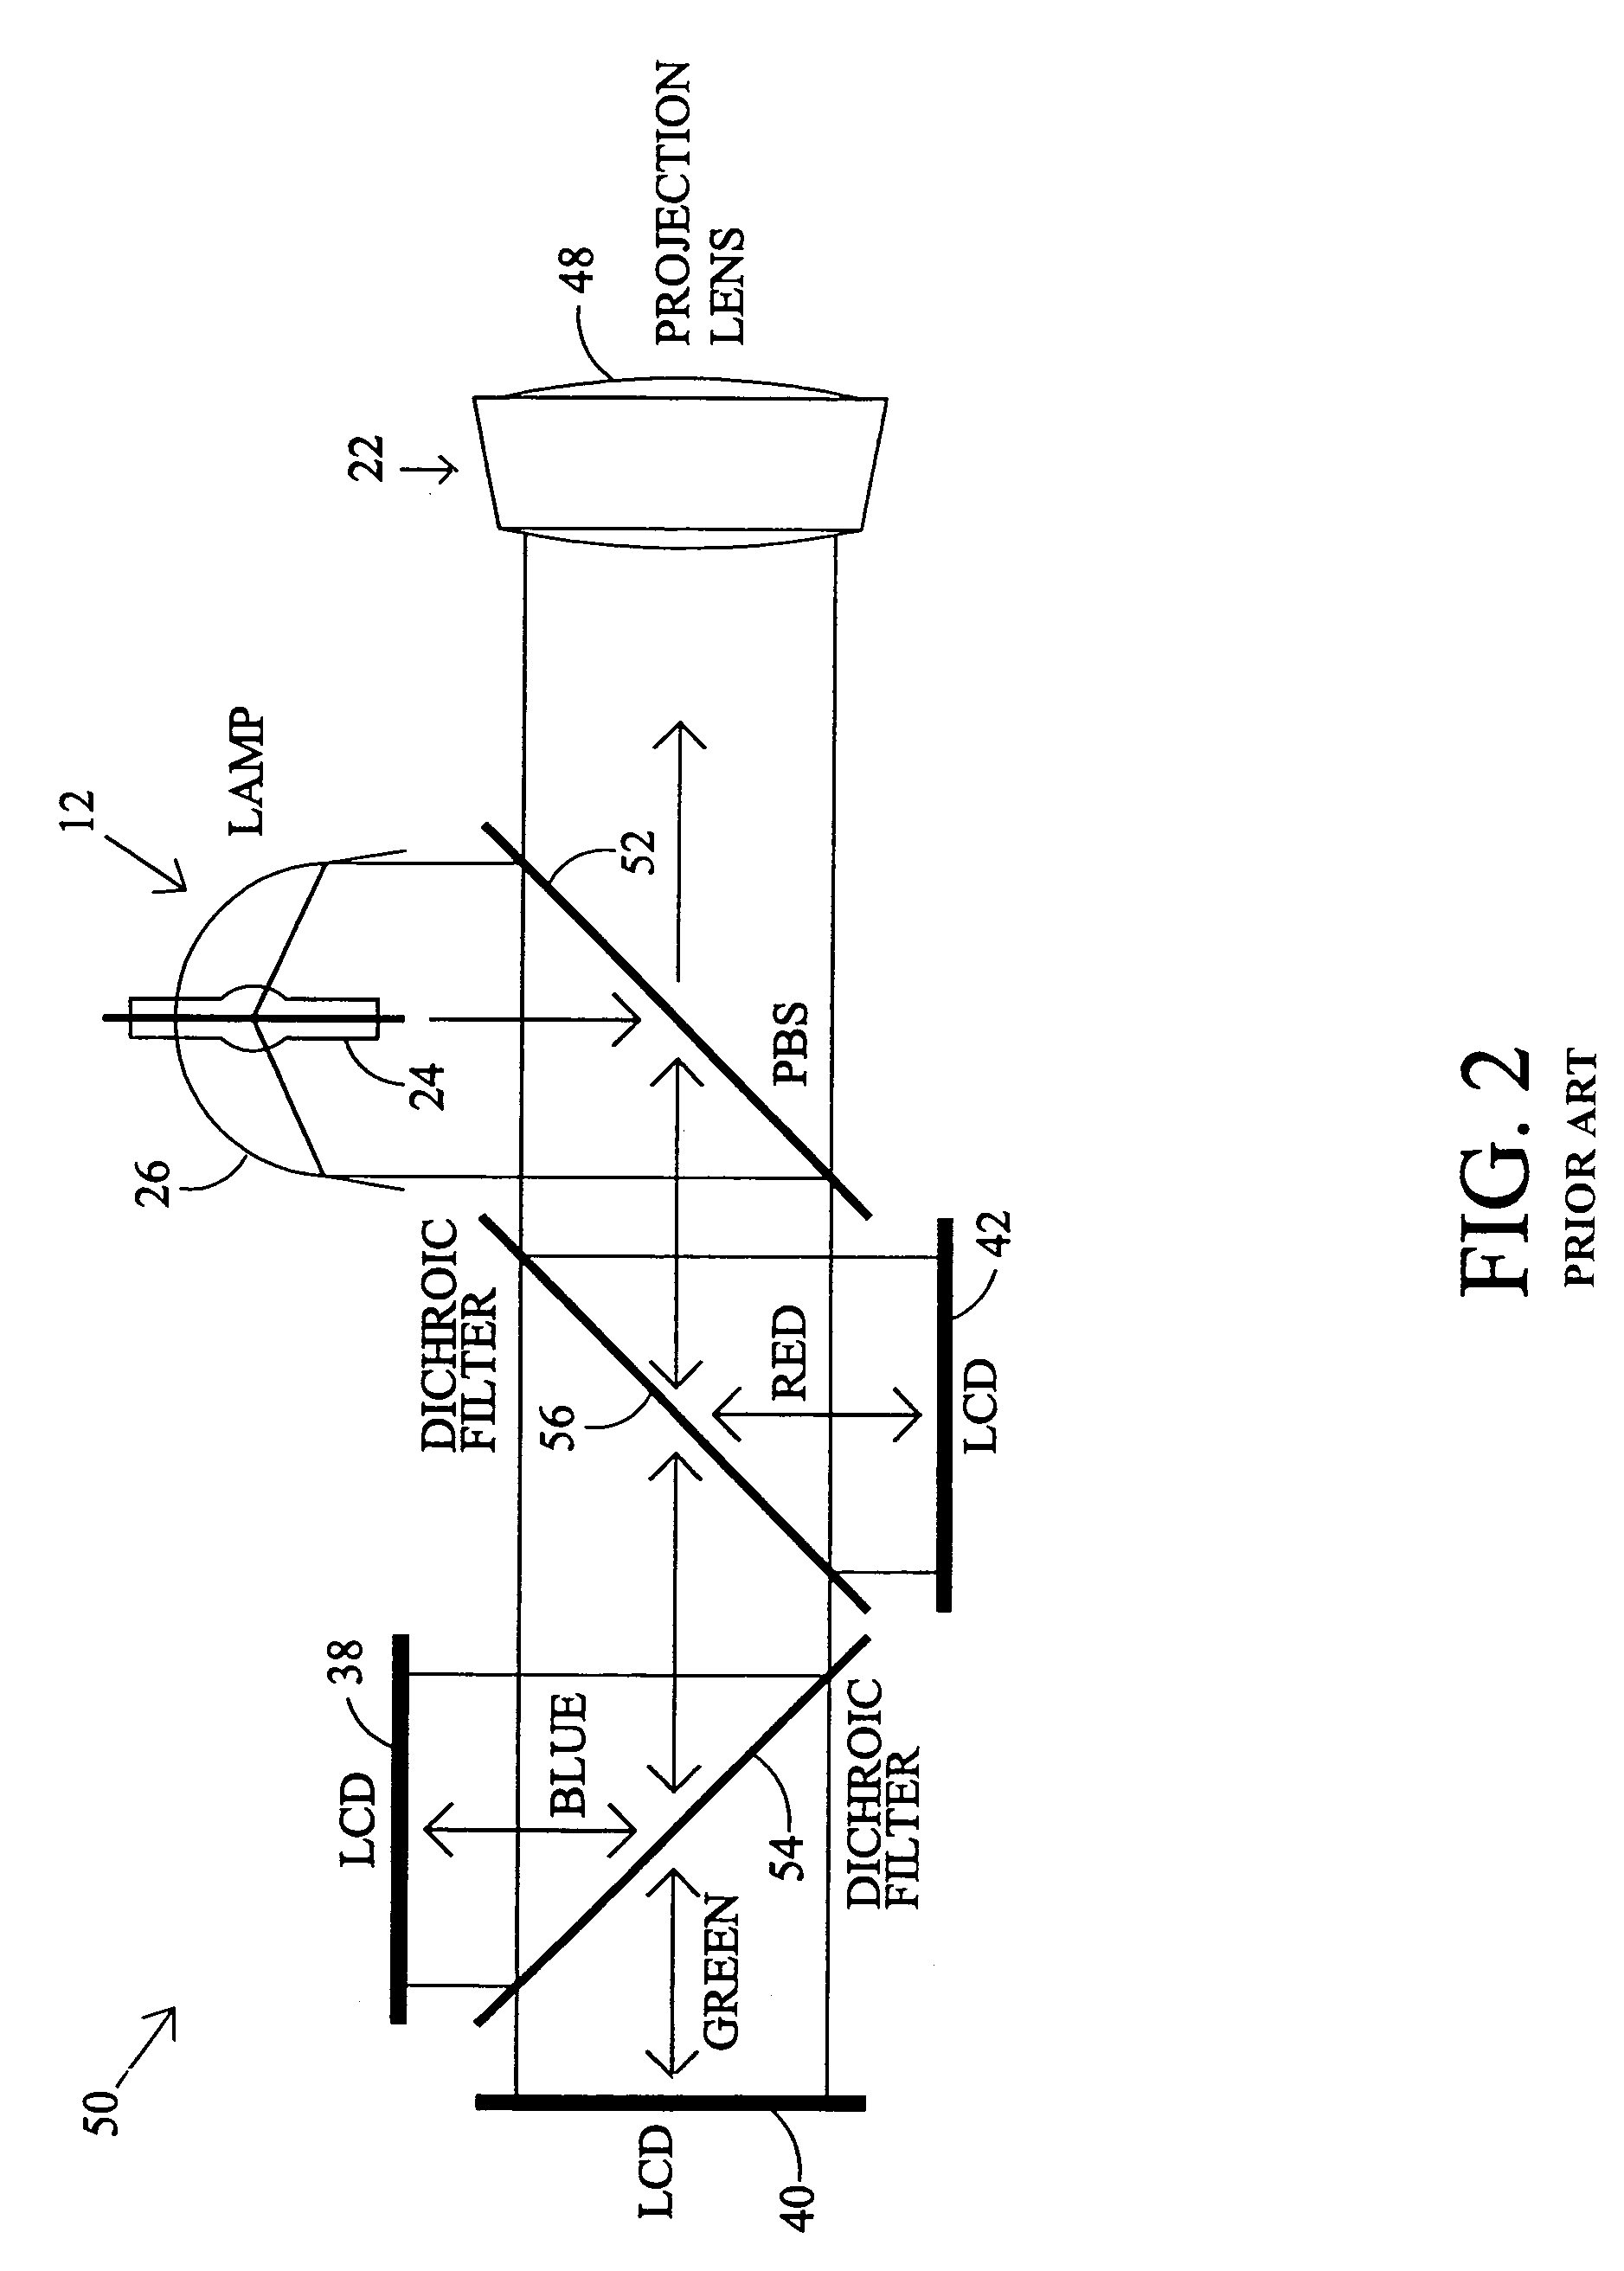 Projection display system using polarized light